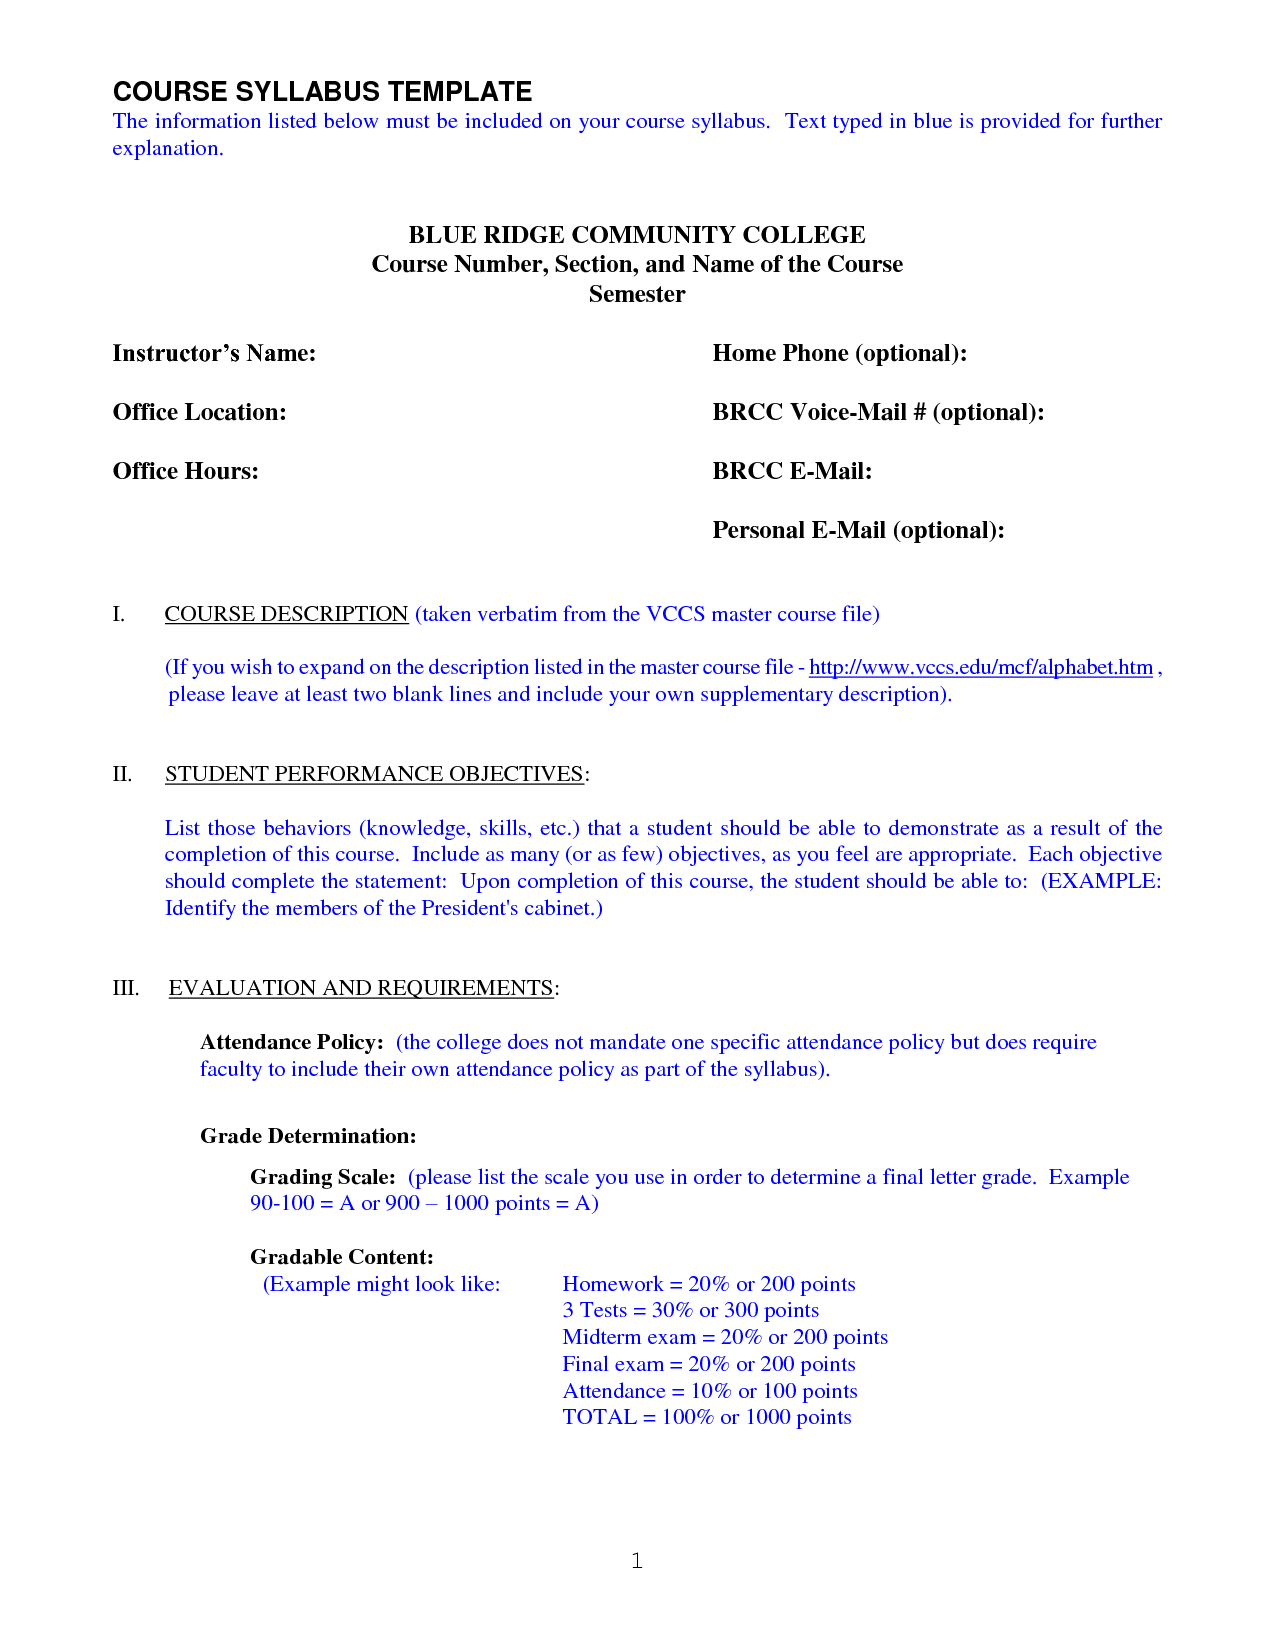 Syllabus Template. Electrical And Electronics Engineering Ac In Blank Syllabus Template